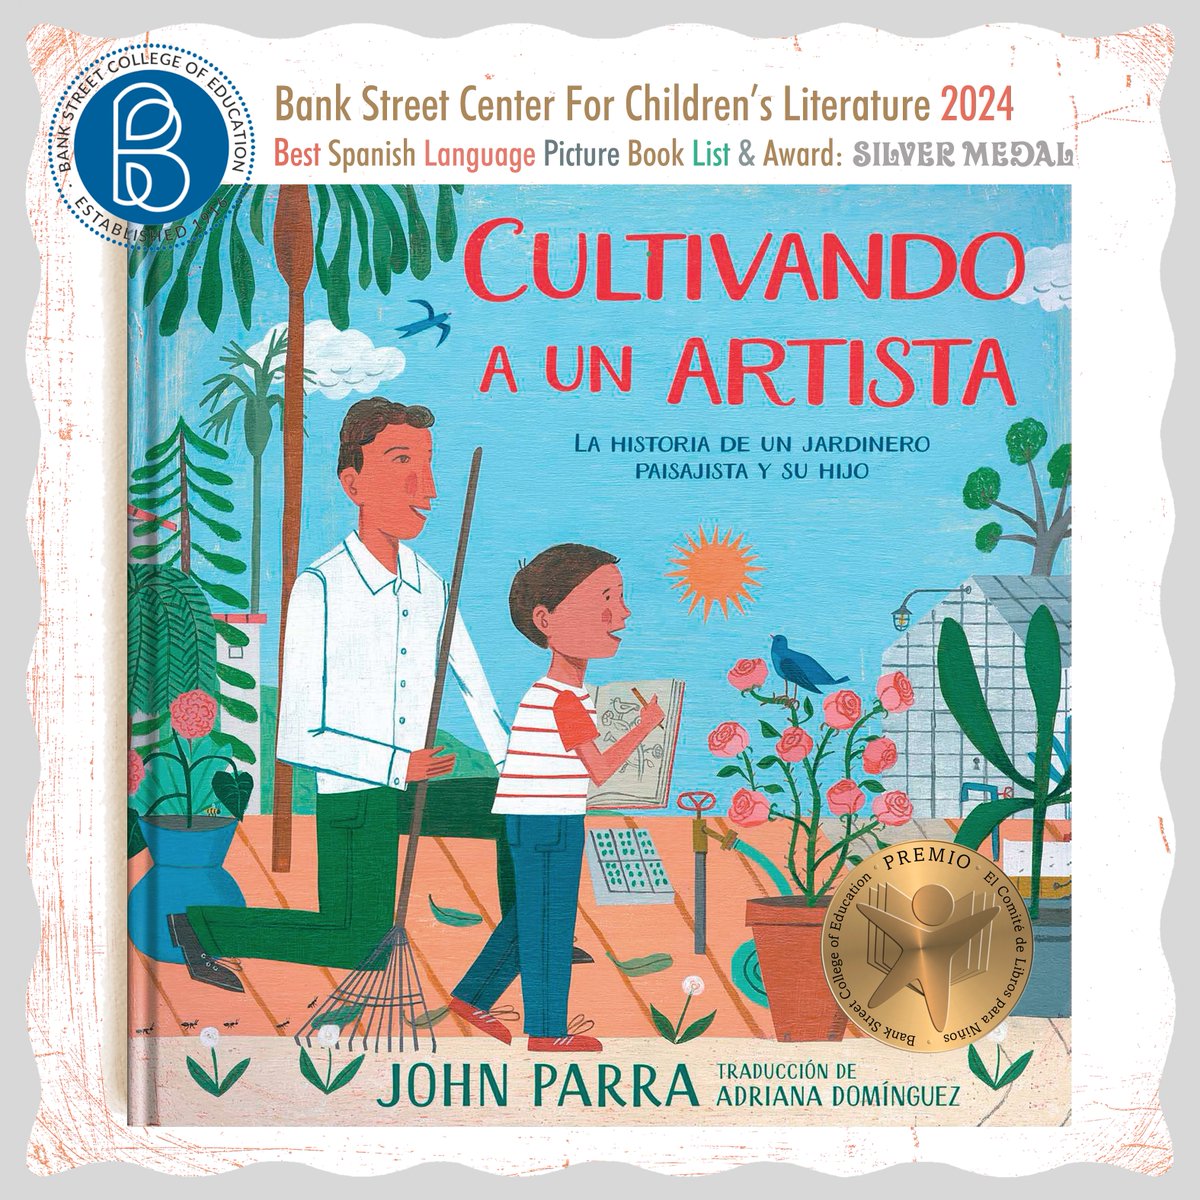 Thank you @BankStreetLib for selecting, Cultivando a un Artista (Growing an Artist) for Best Spanish Language Picture Book List & Award: Silver Medal. Xtra thanks to my agent Adriana @VocesBlog for the book's wonderful Spanish translation. @SimonKIDS shorturl.at/xAMT2